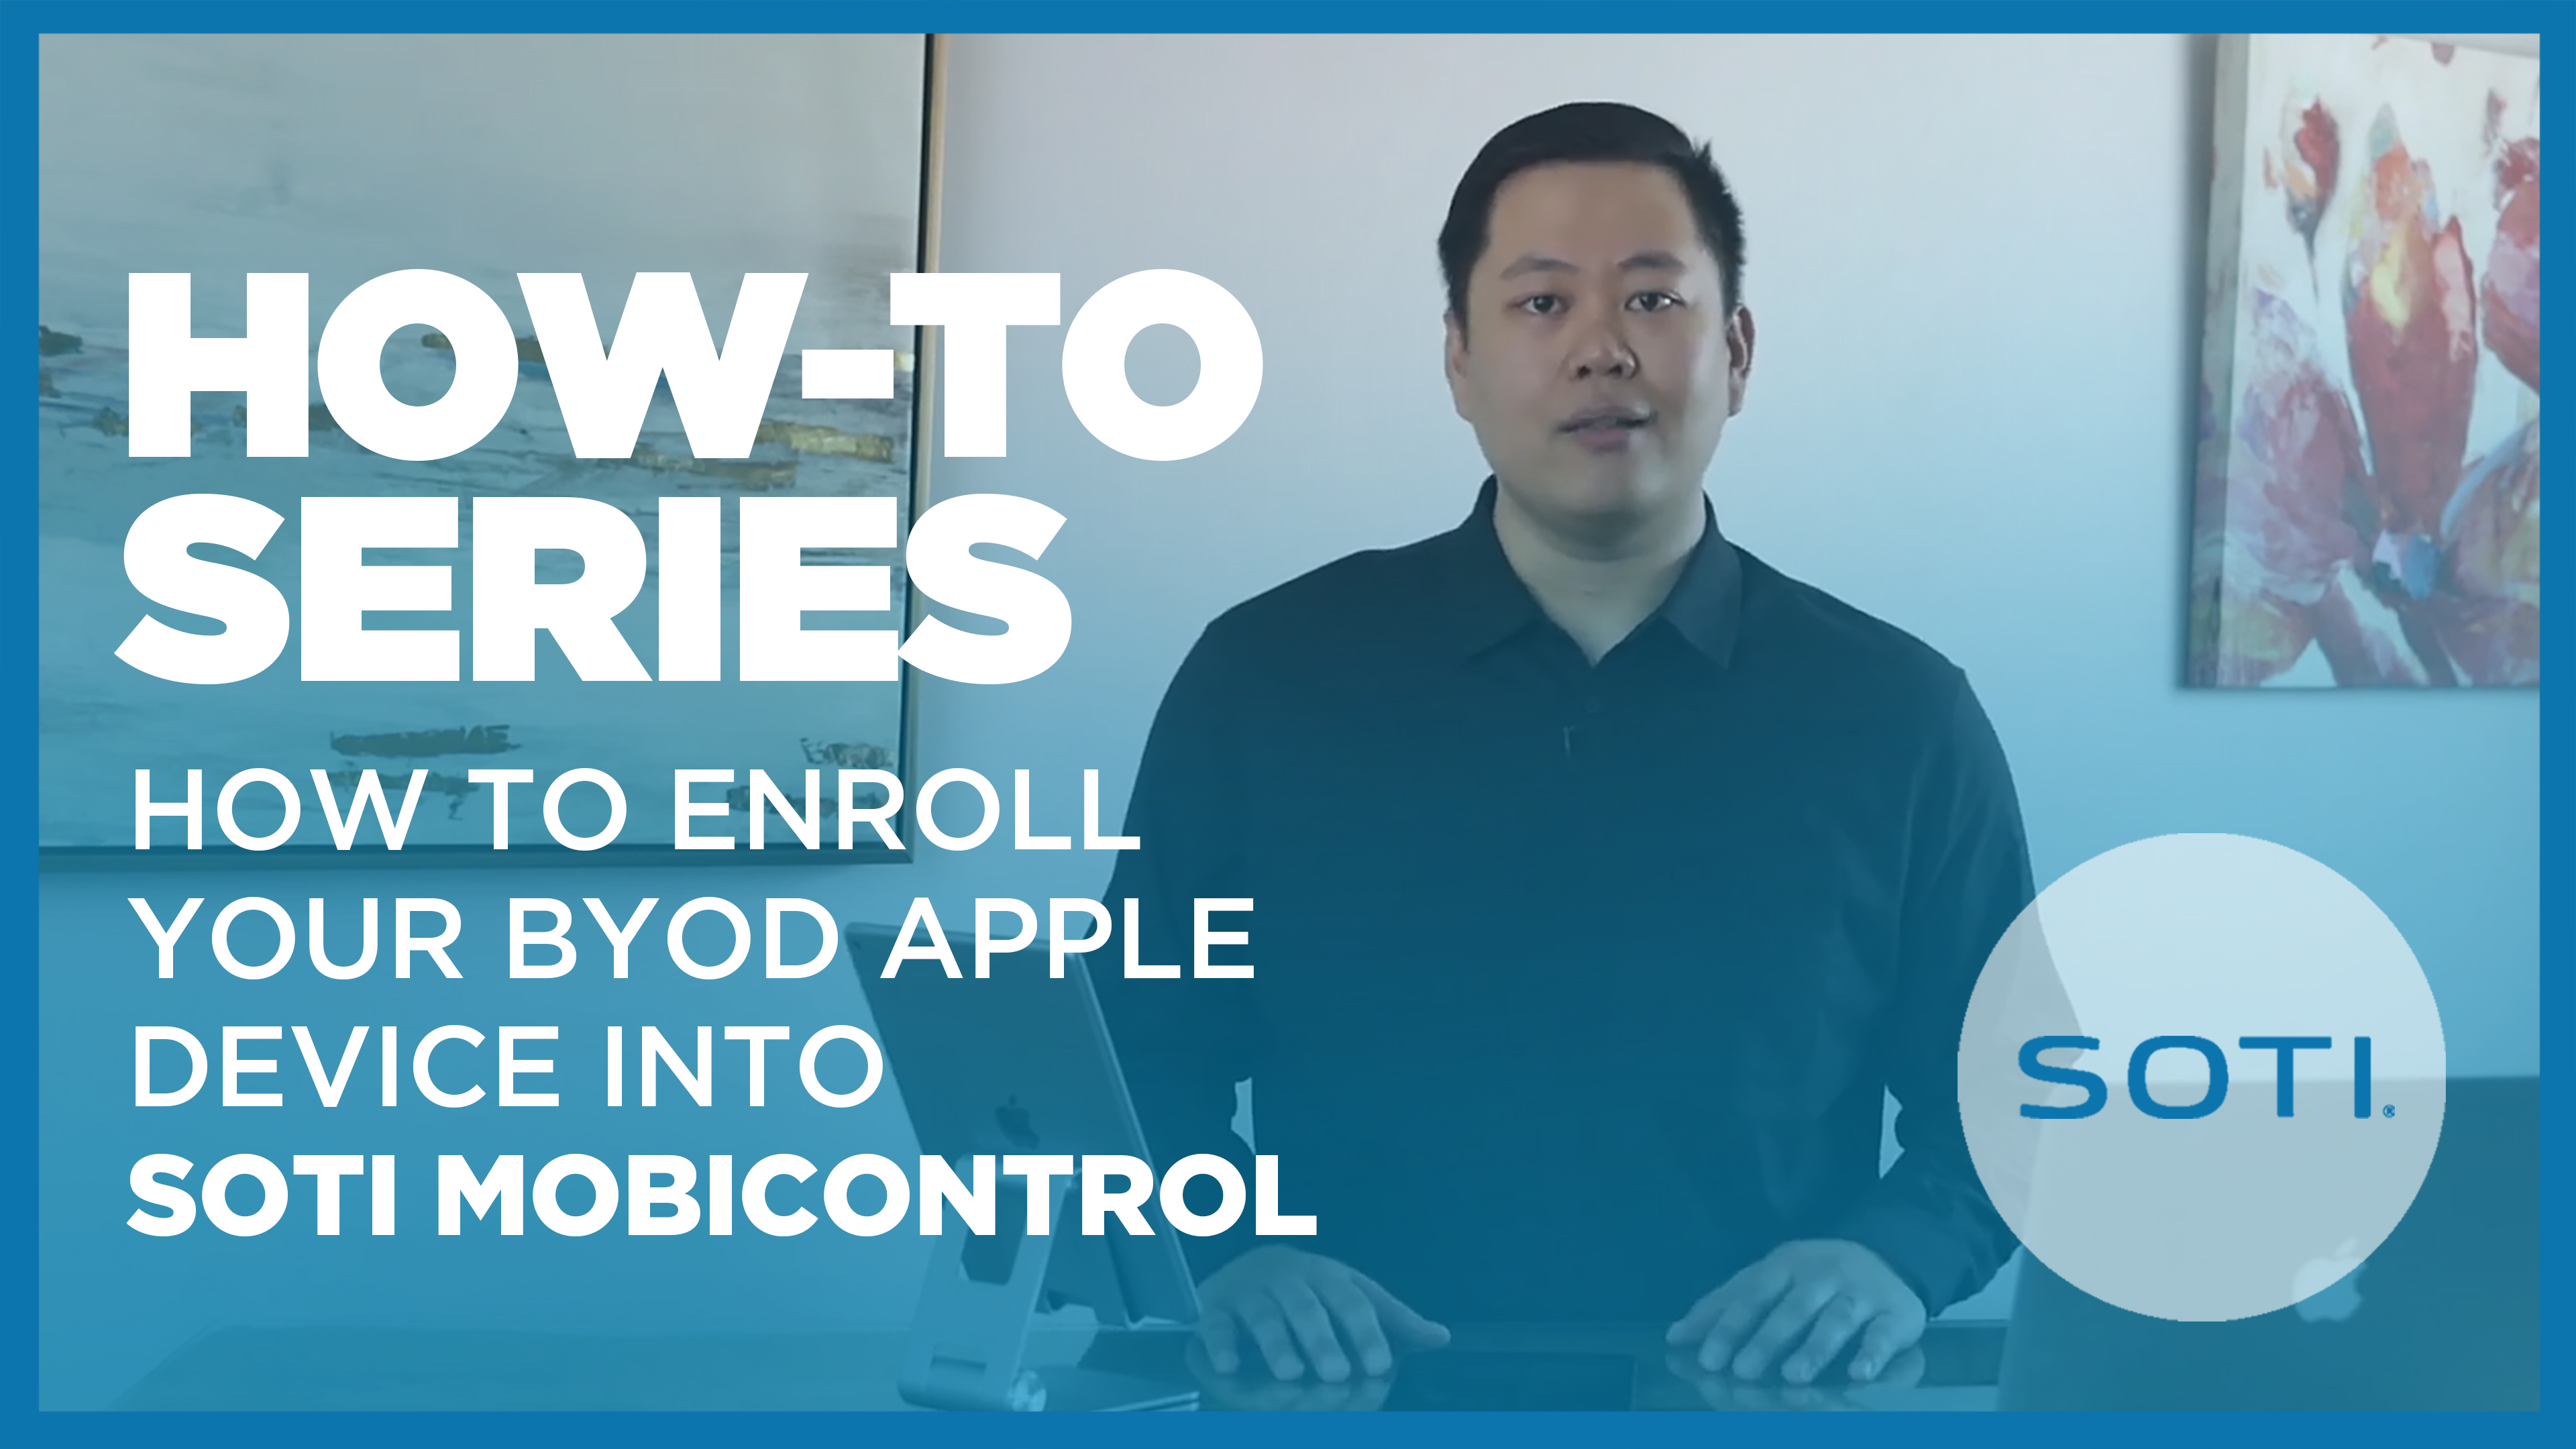 How-To: Enroll Your BYOD Apple Device into SOTI MobiControl